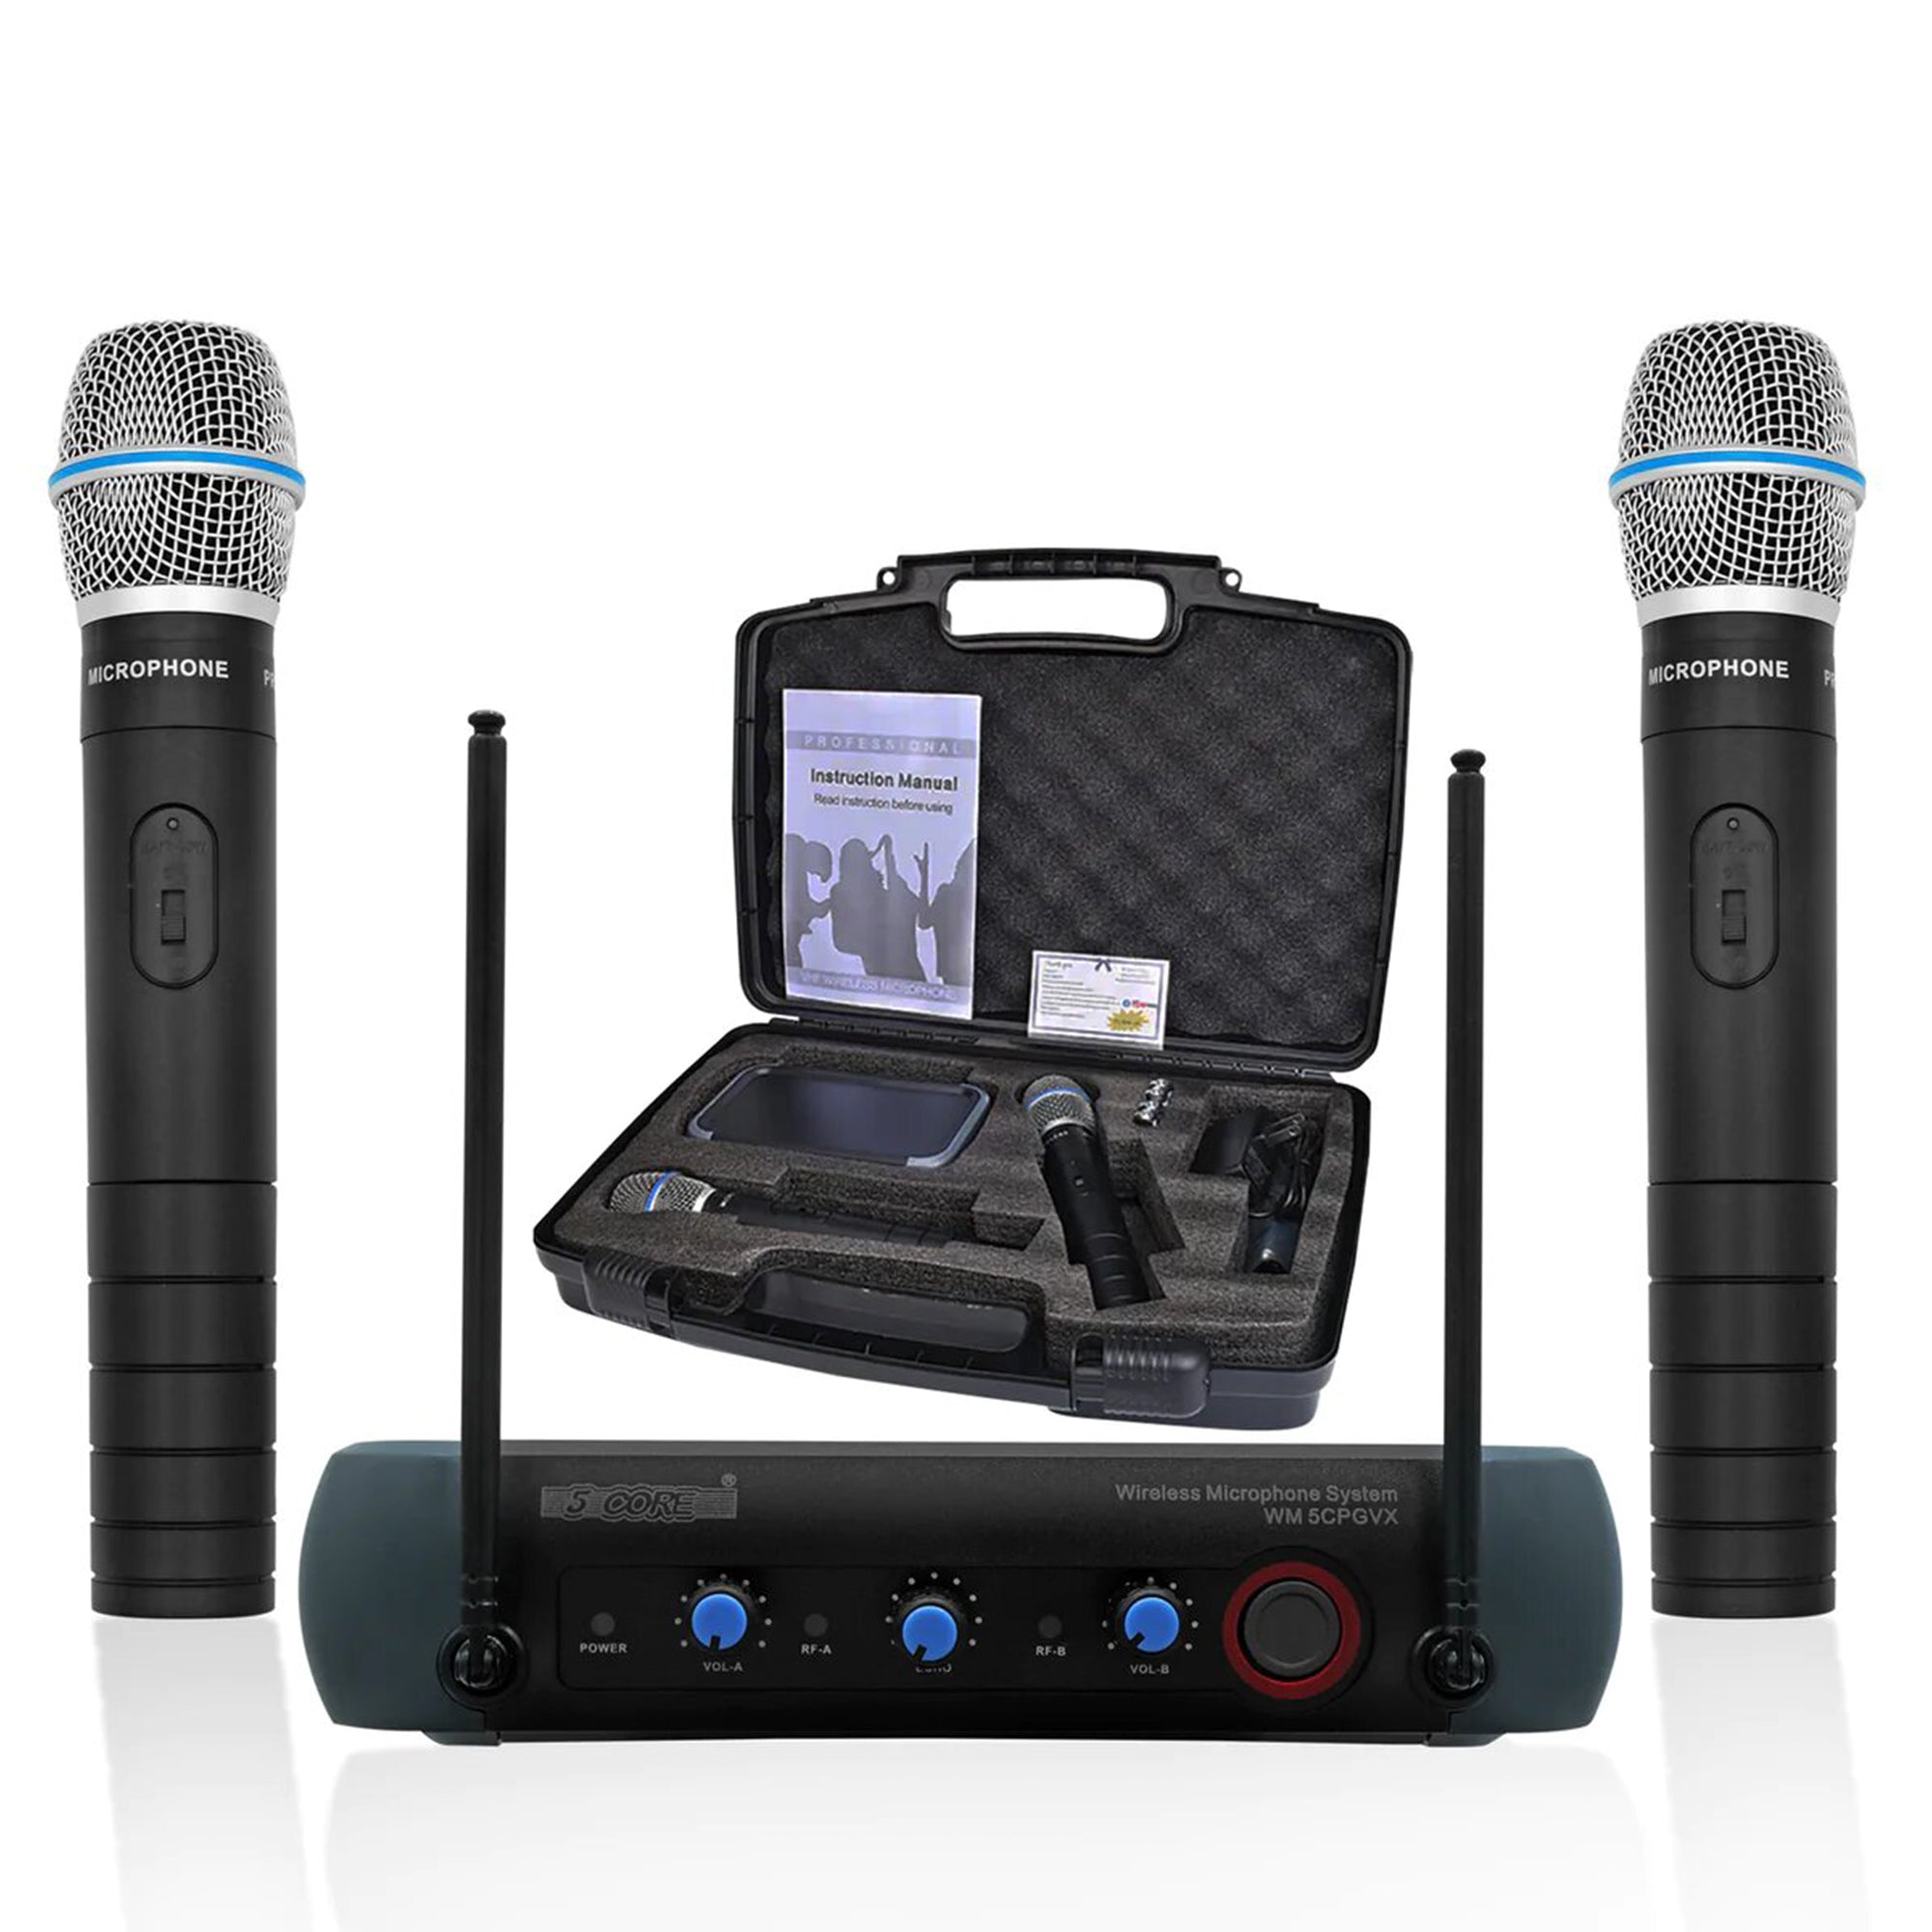 5 Core Professional Wireless Microphone System • VHF Fixed Frequency • 200FT Range • 2 Handheld Mics